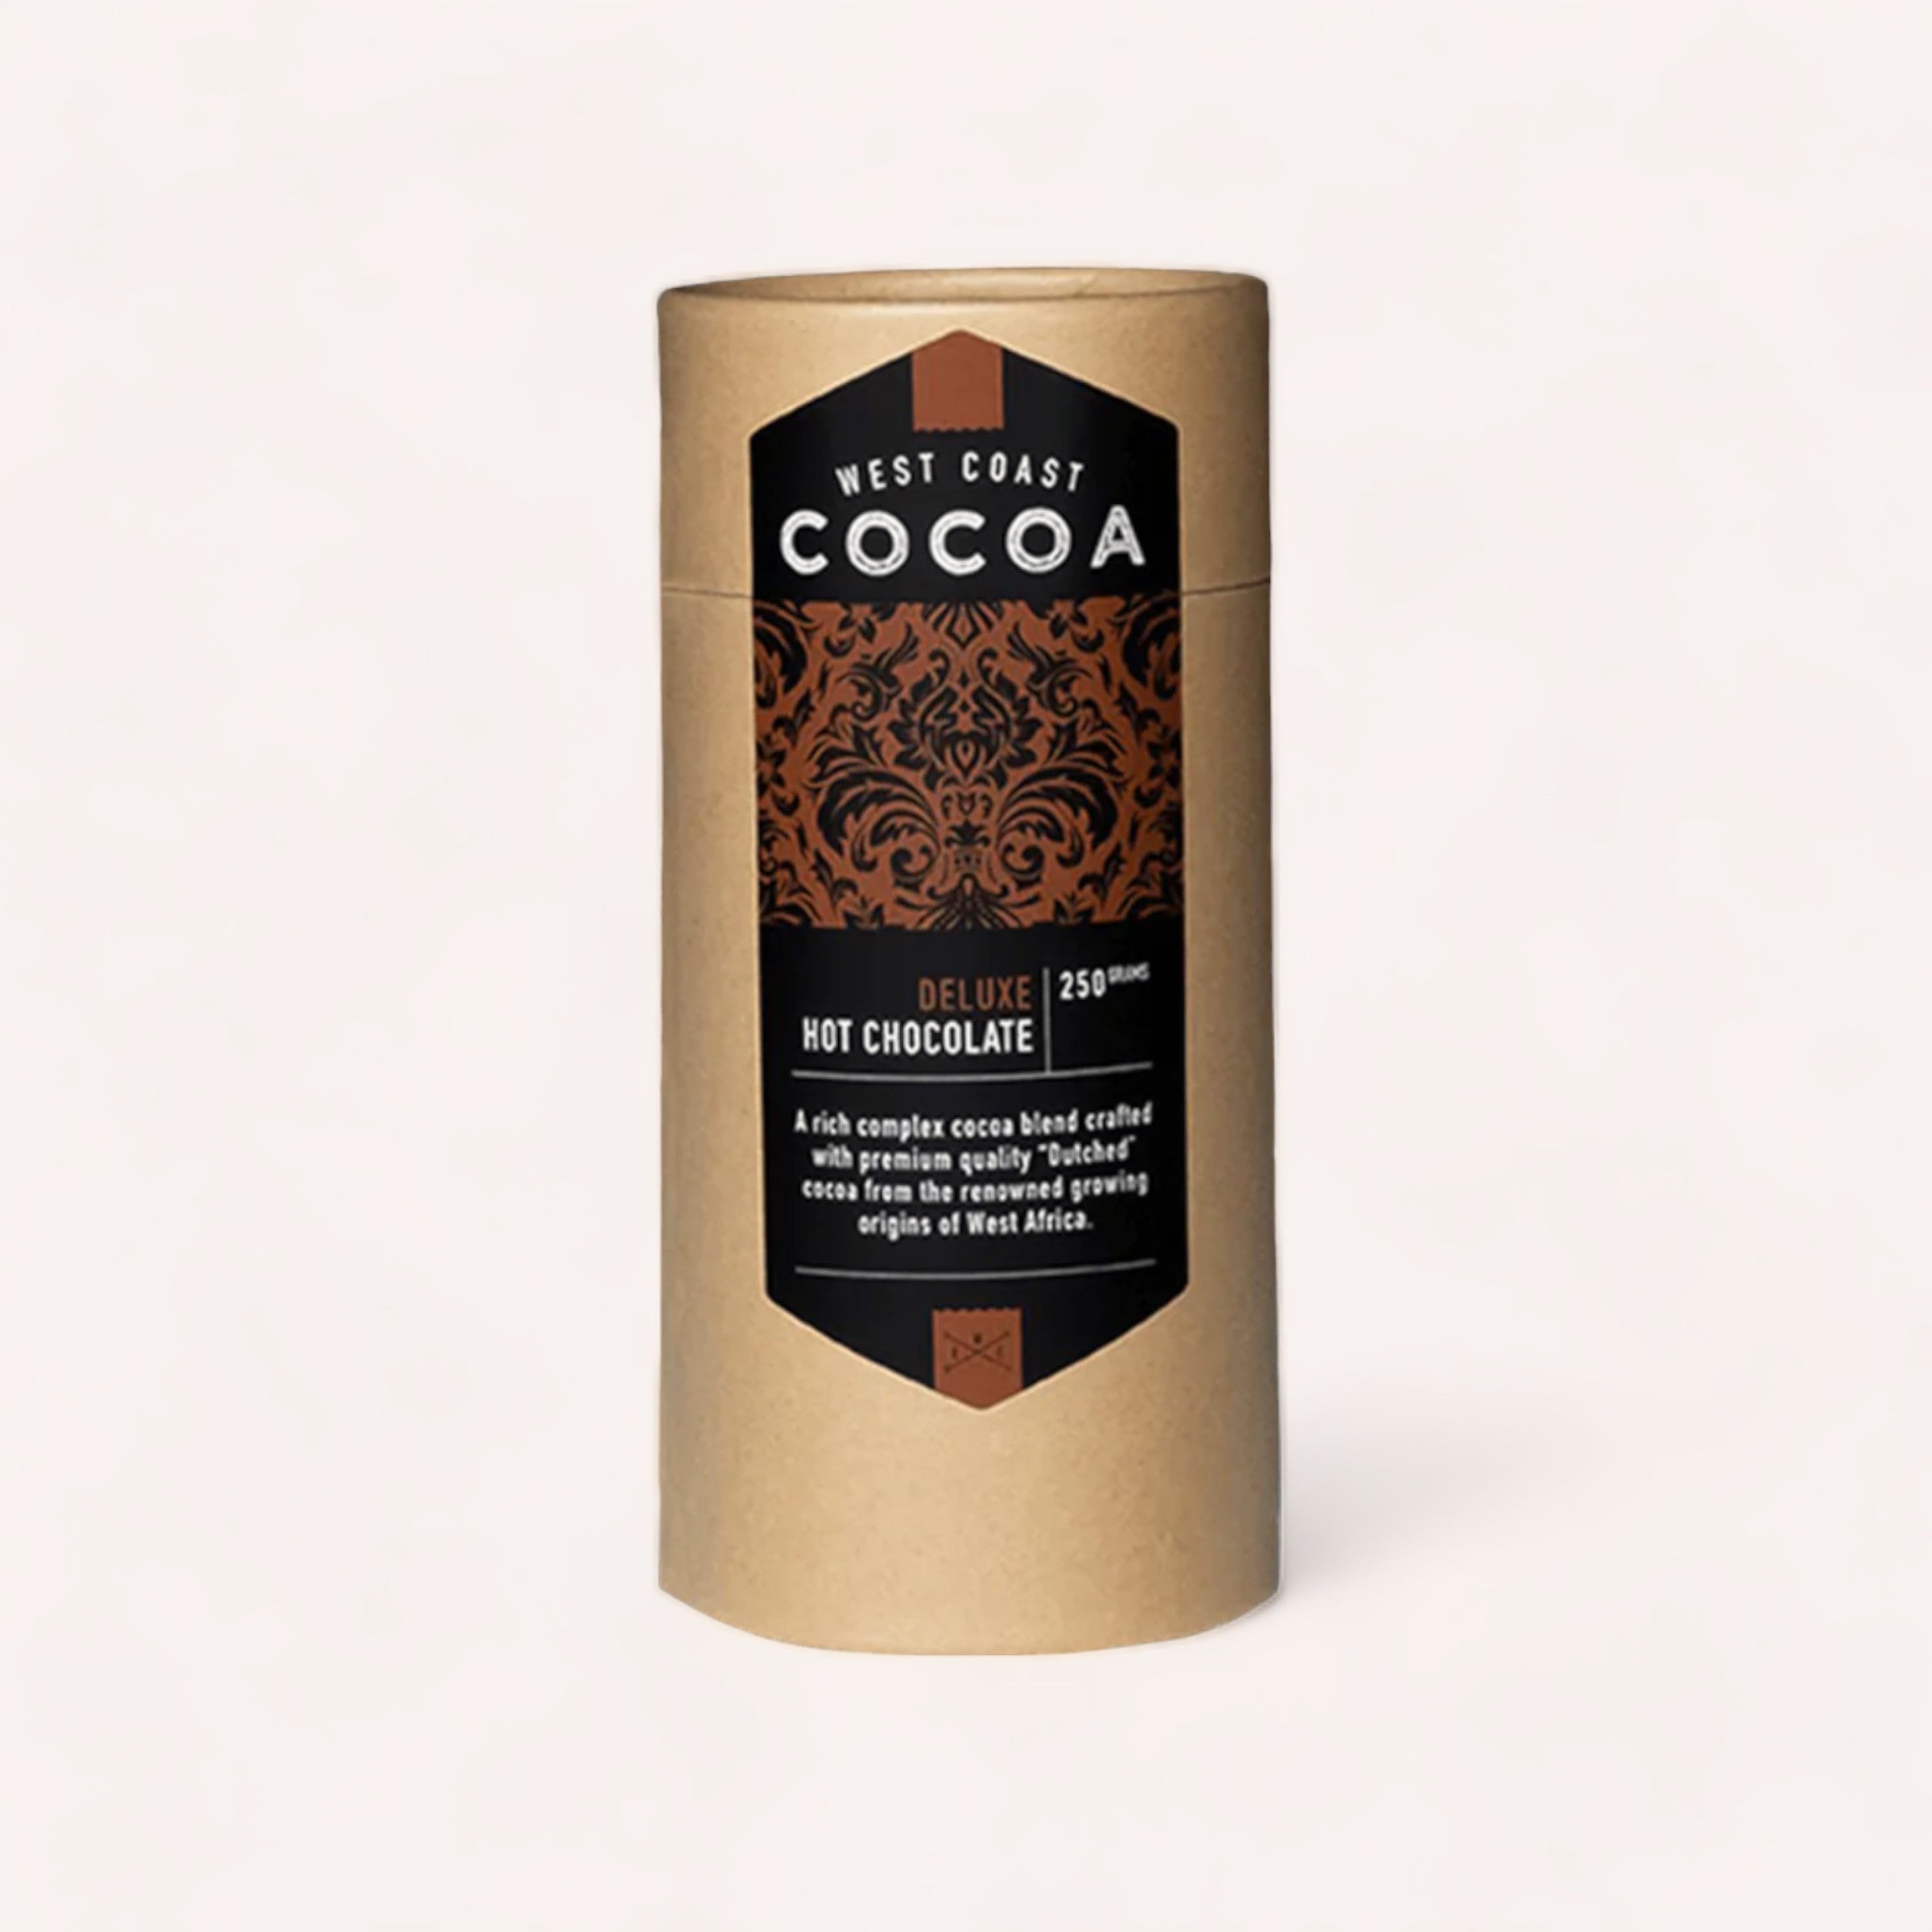 deluxe hot chocolate by west coast cocoa